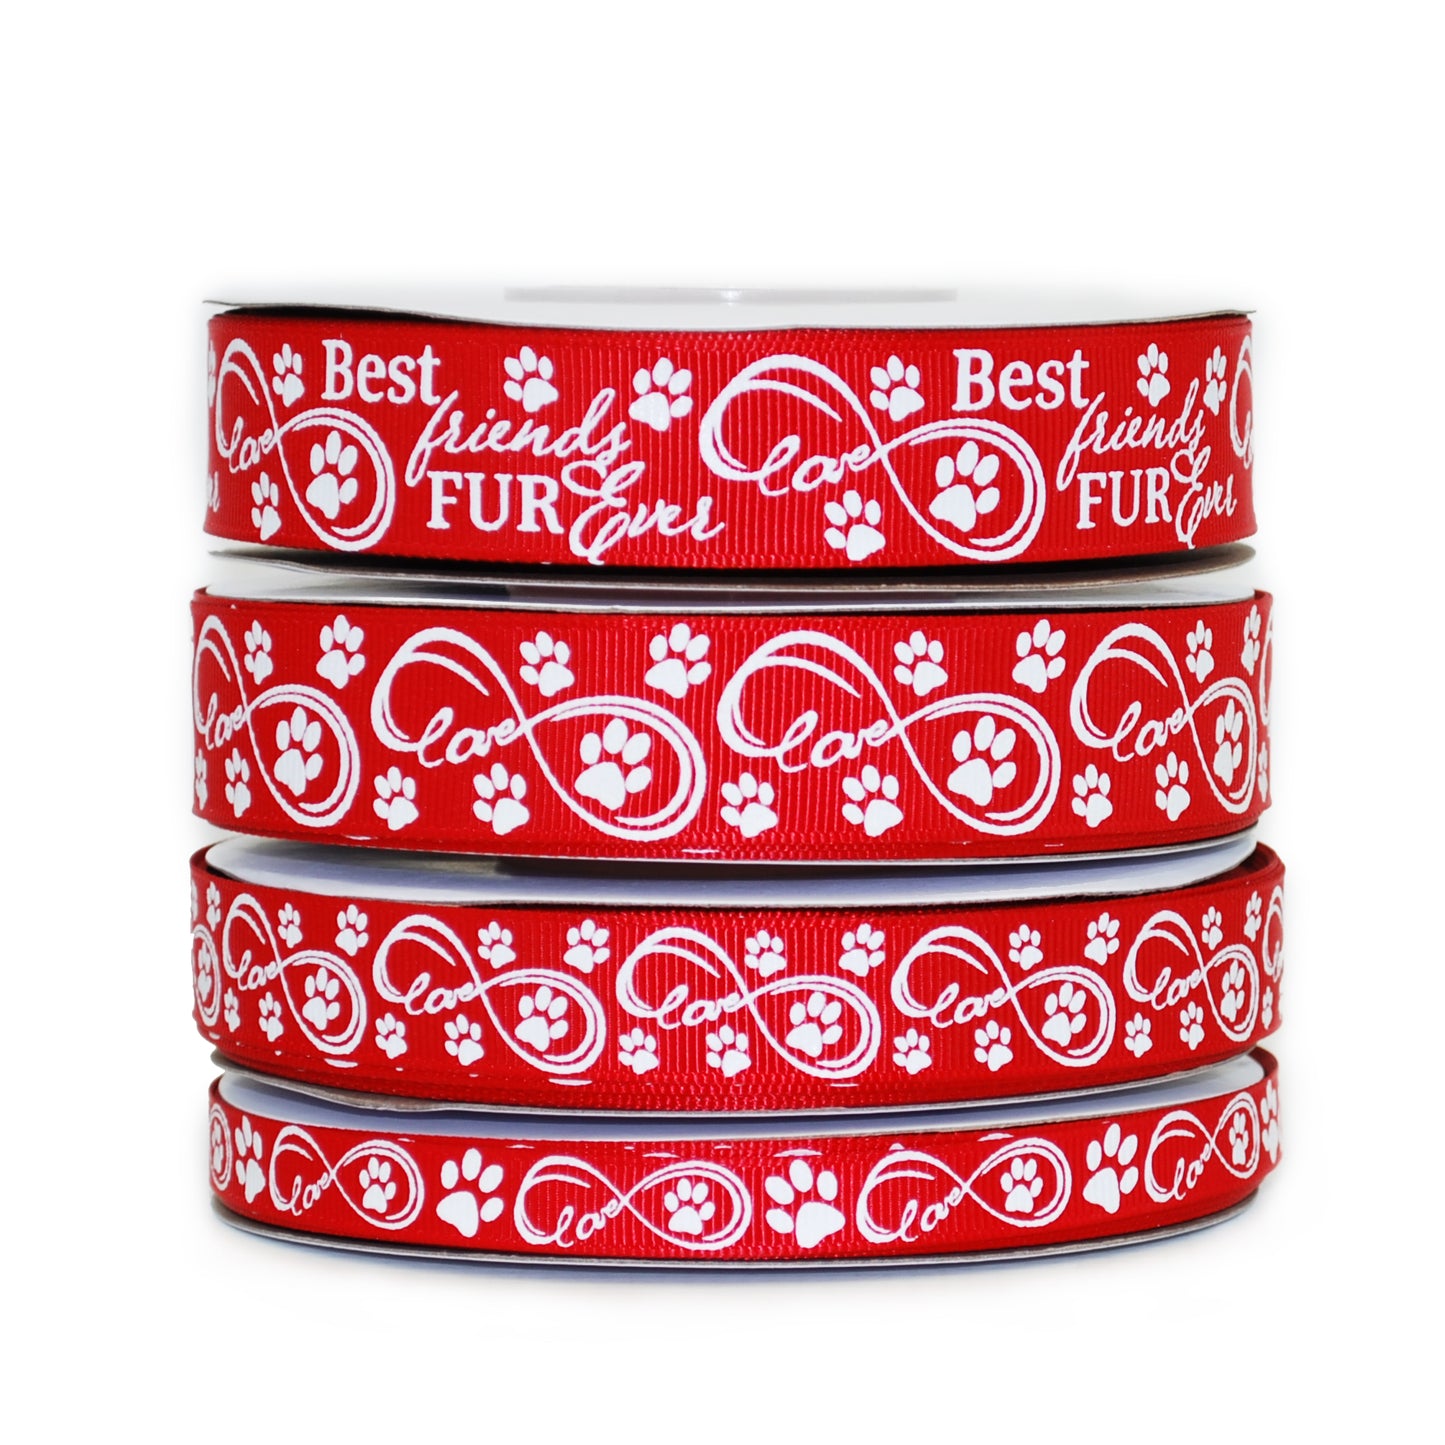 Best Friends Fur Ever Grosgrain Ribbon Collection On Red